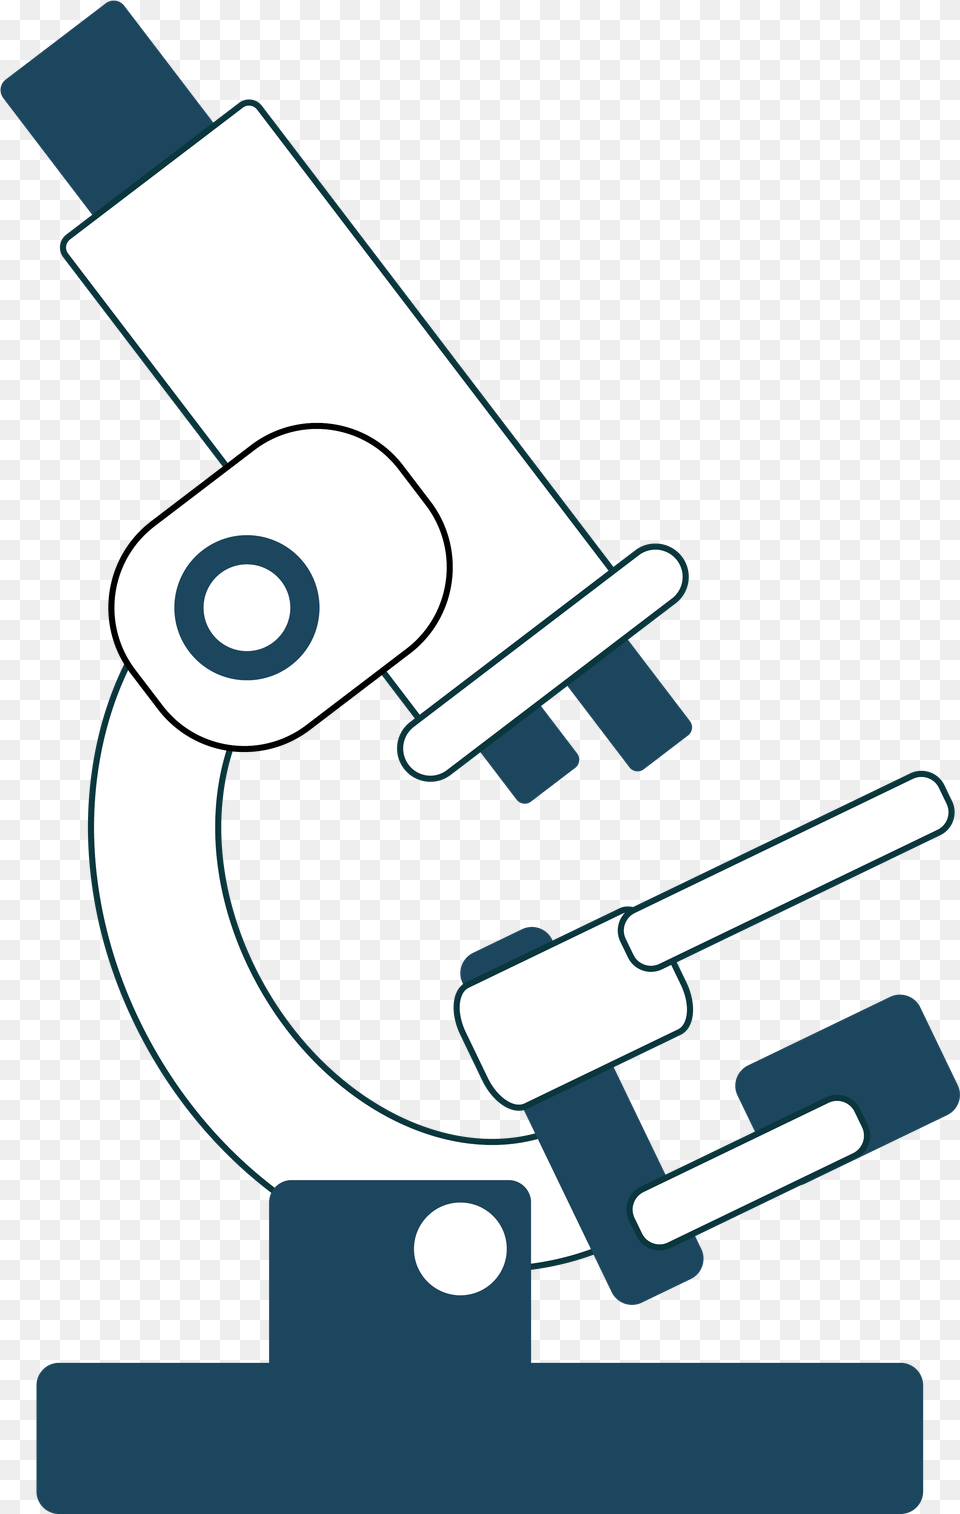 Microscope Clipart Health Science Transparent Background Microscope Clipart Free Png Download